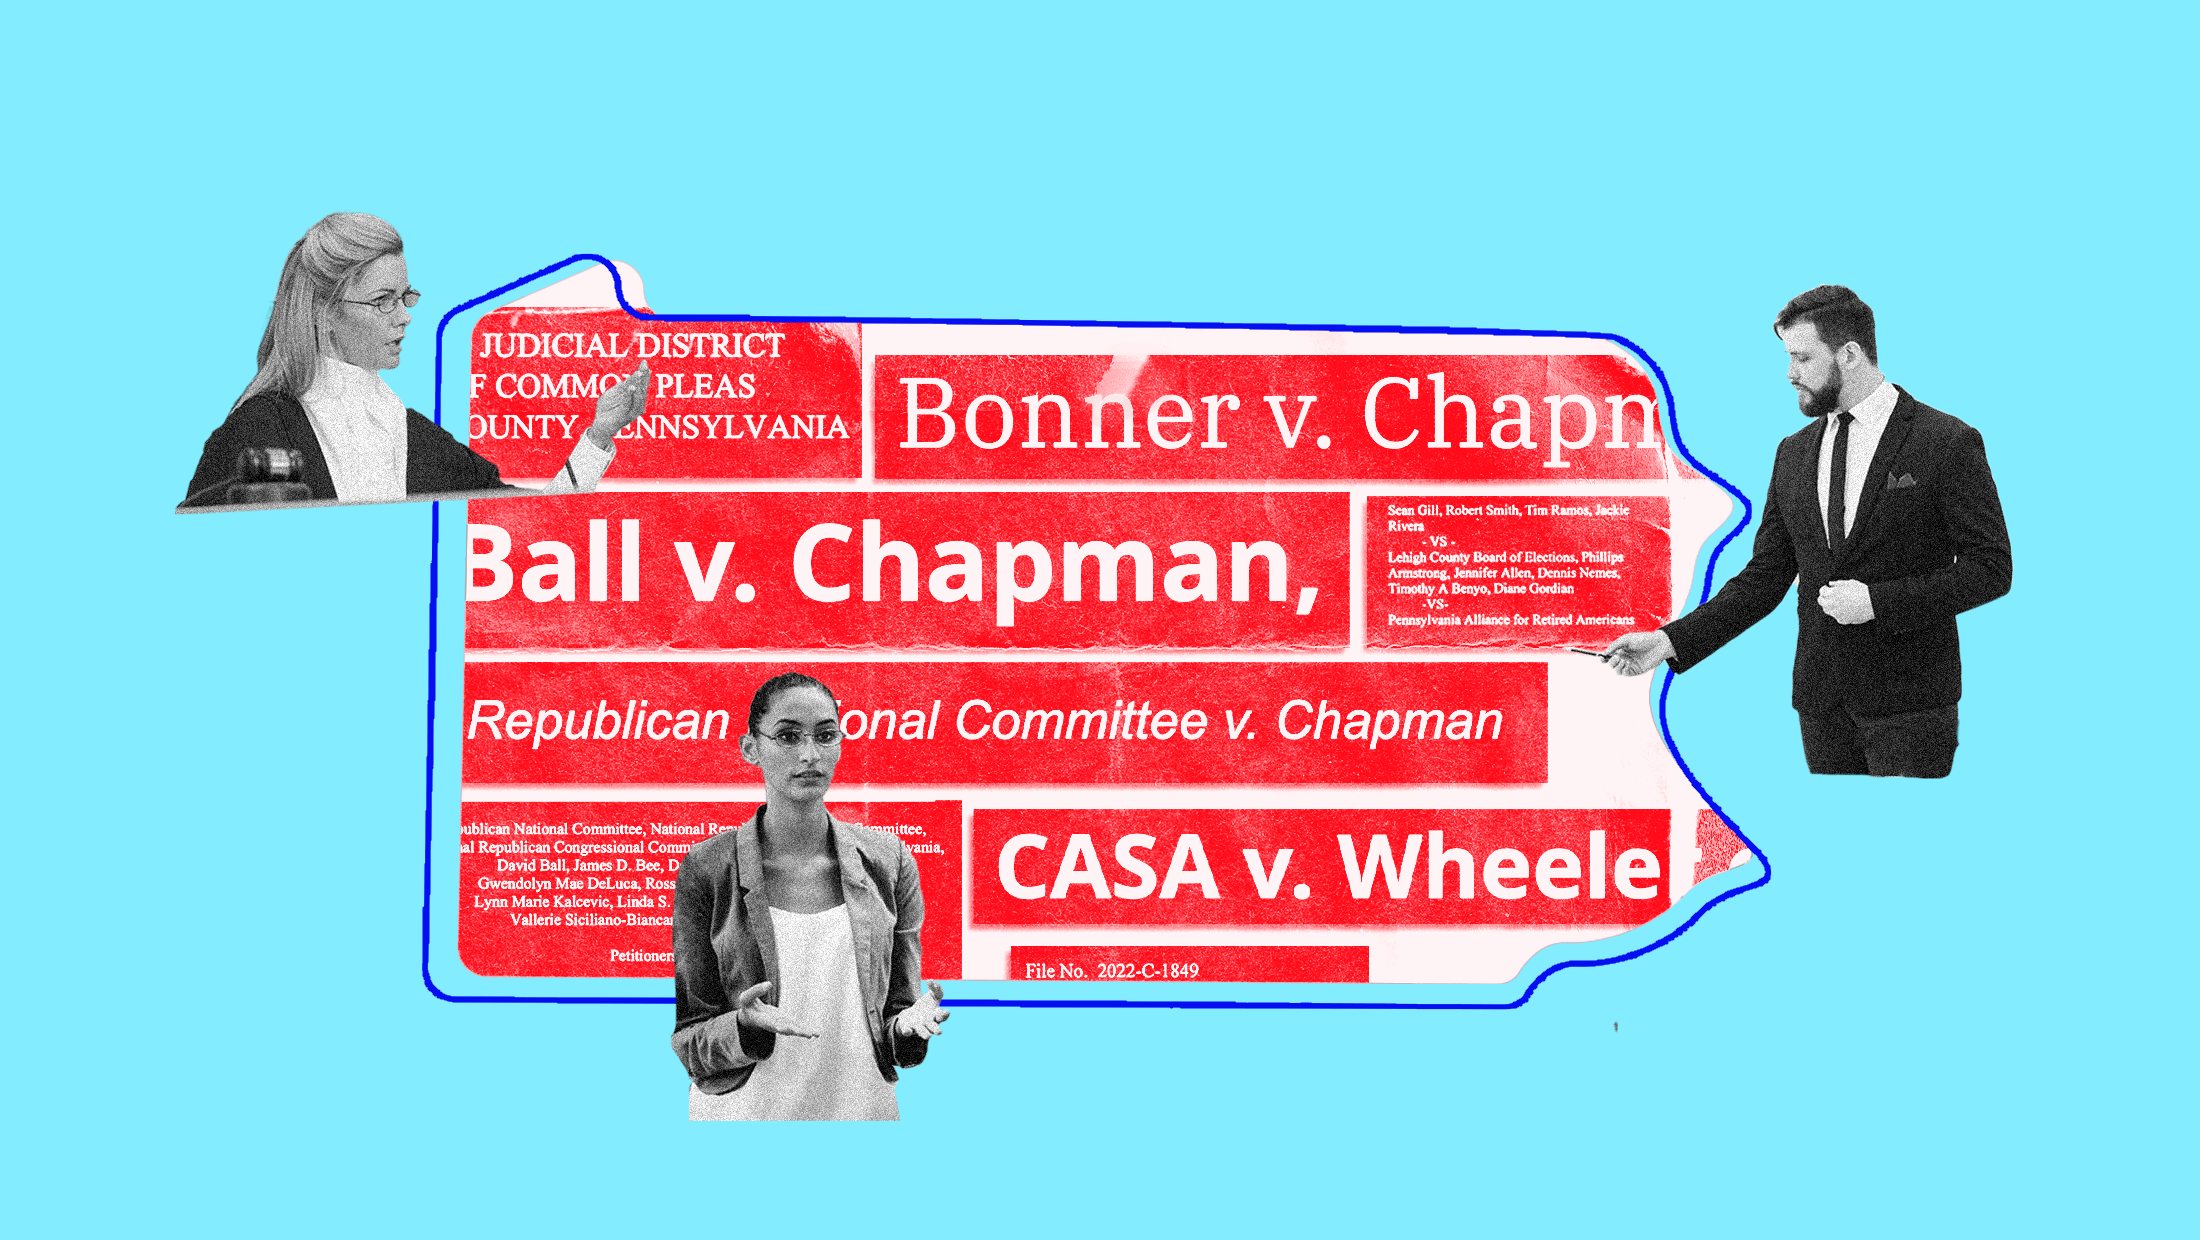 A dark blue outline of Pennsylvania on a light blue background with red cutout titles of cases filling the outline. Three figures, a judge and two lawyers, are arranged around the outline.